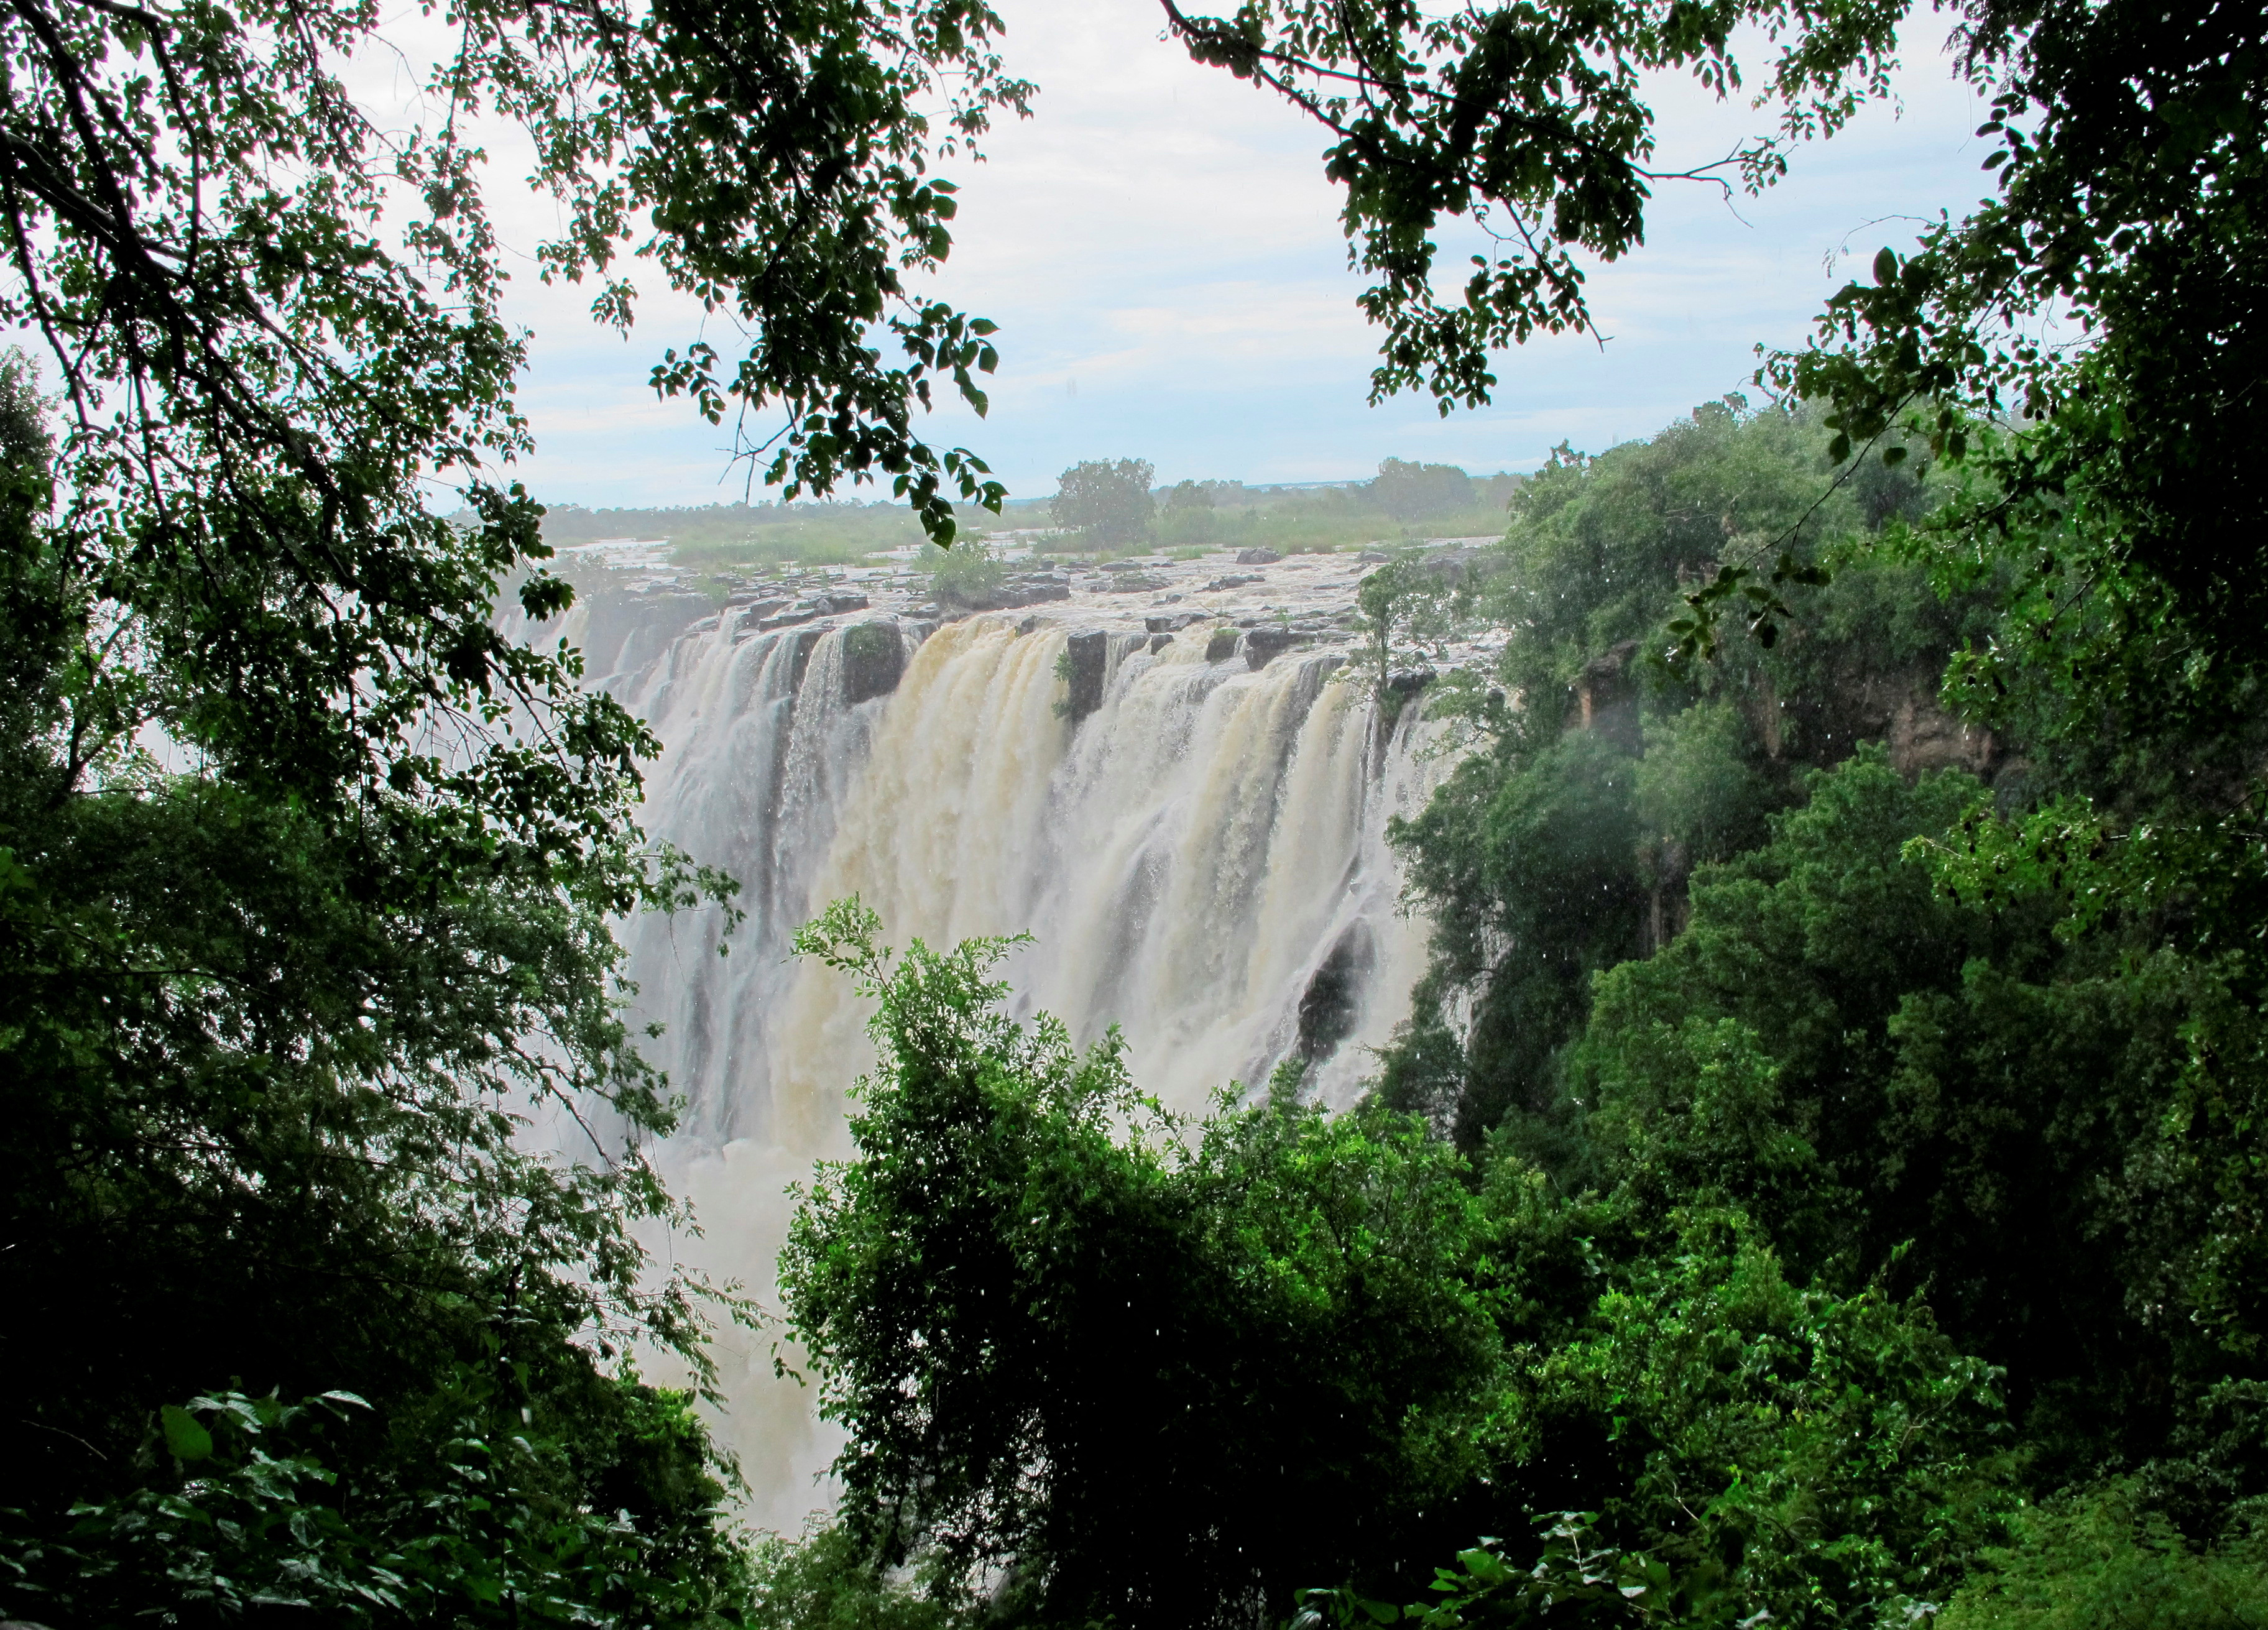 A general view of the Victoria Falls on the Zambezi River which forms the border between Zambia and Zimbabwe